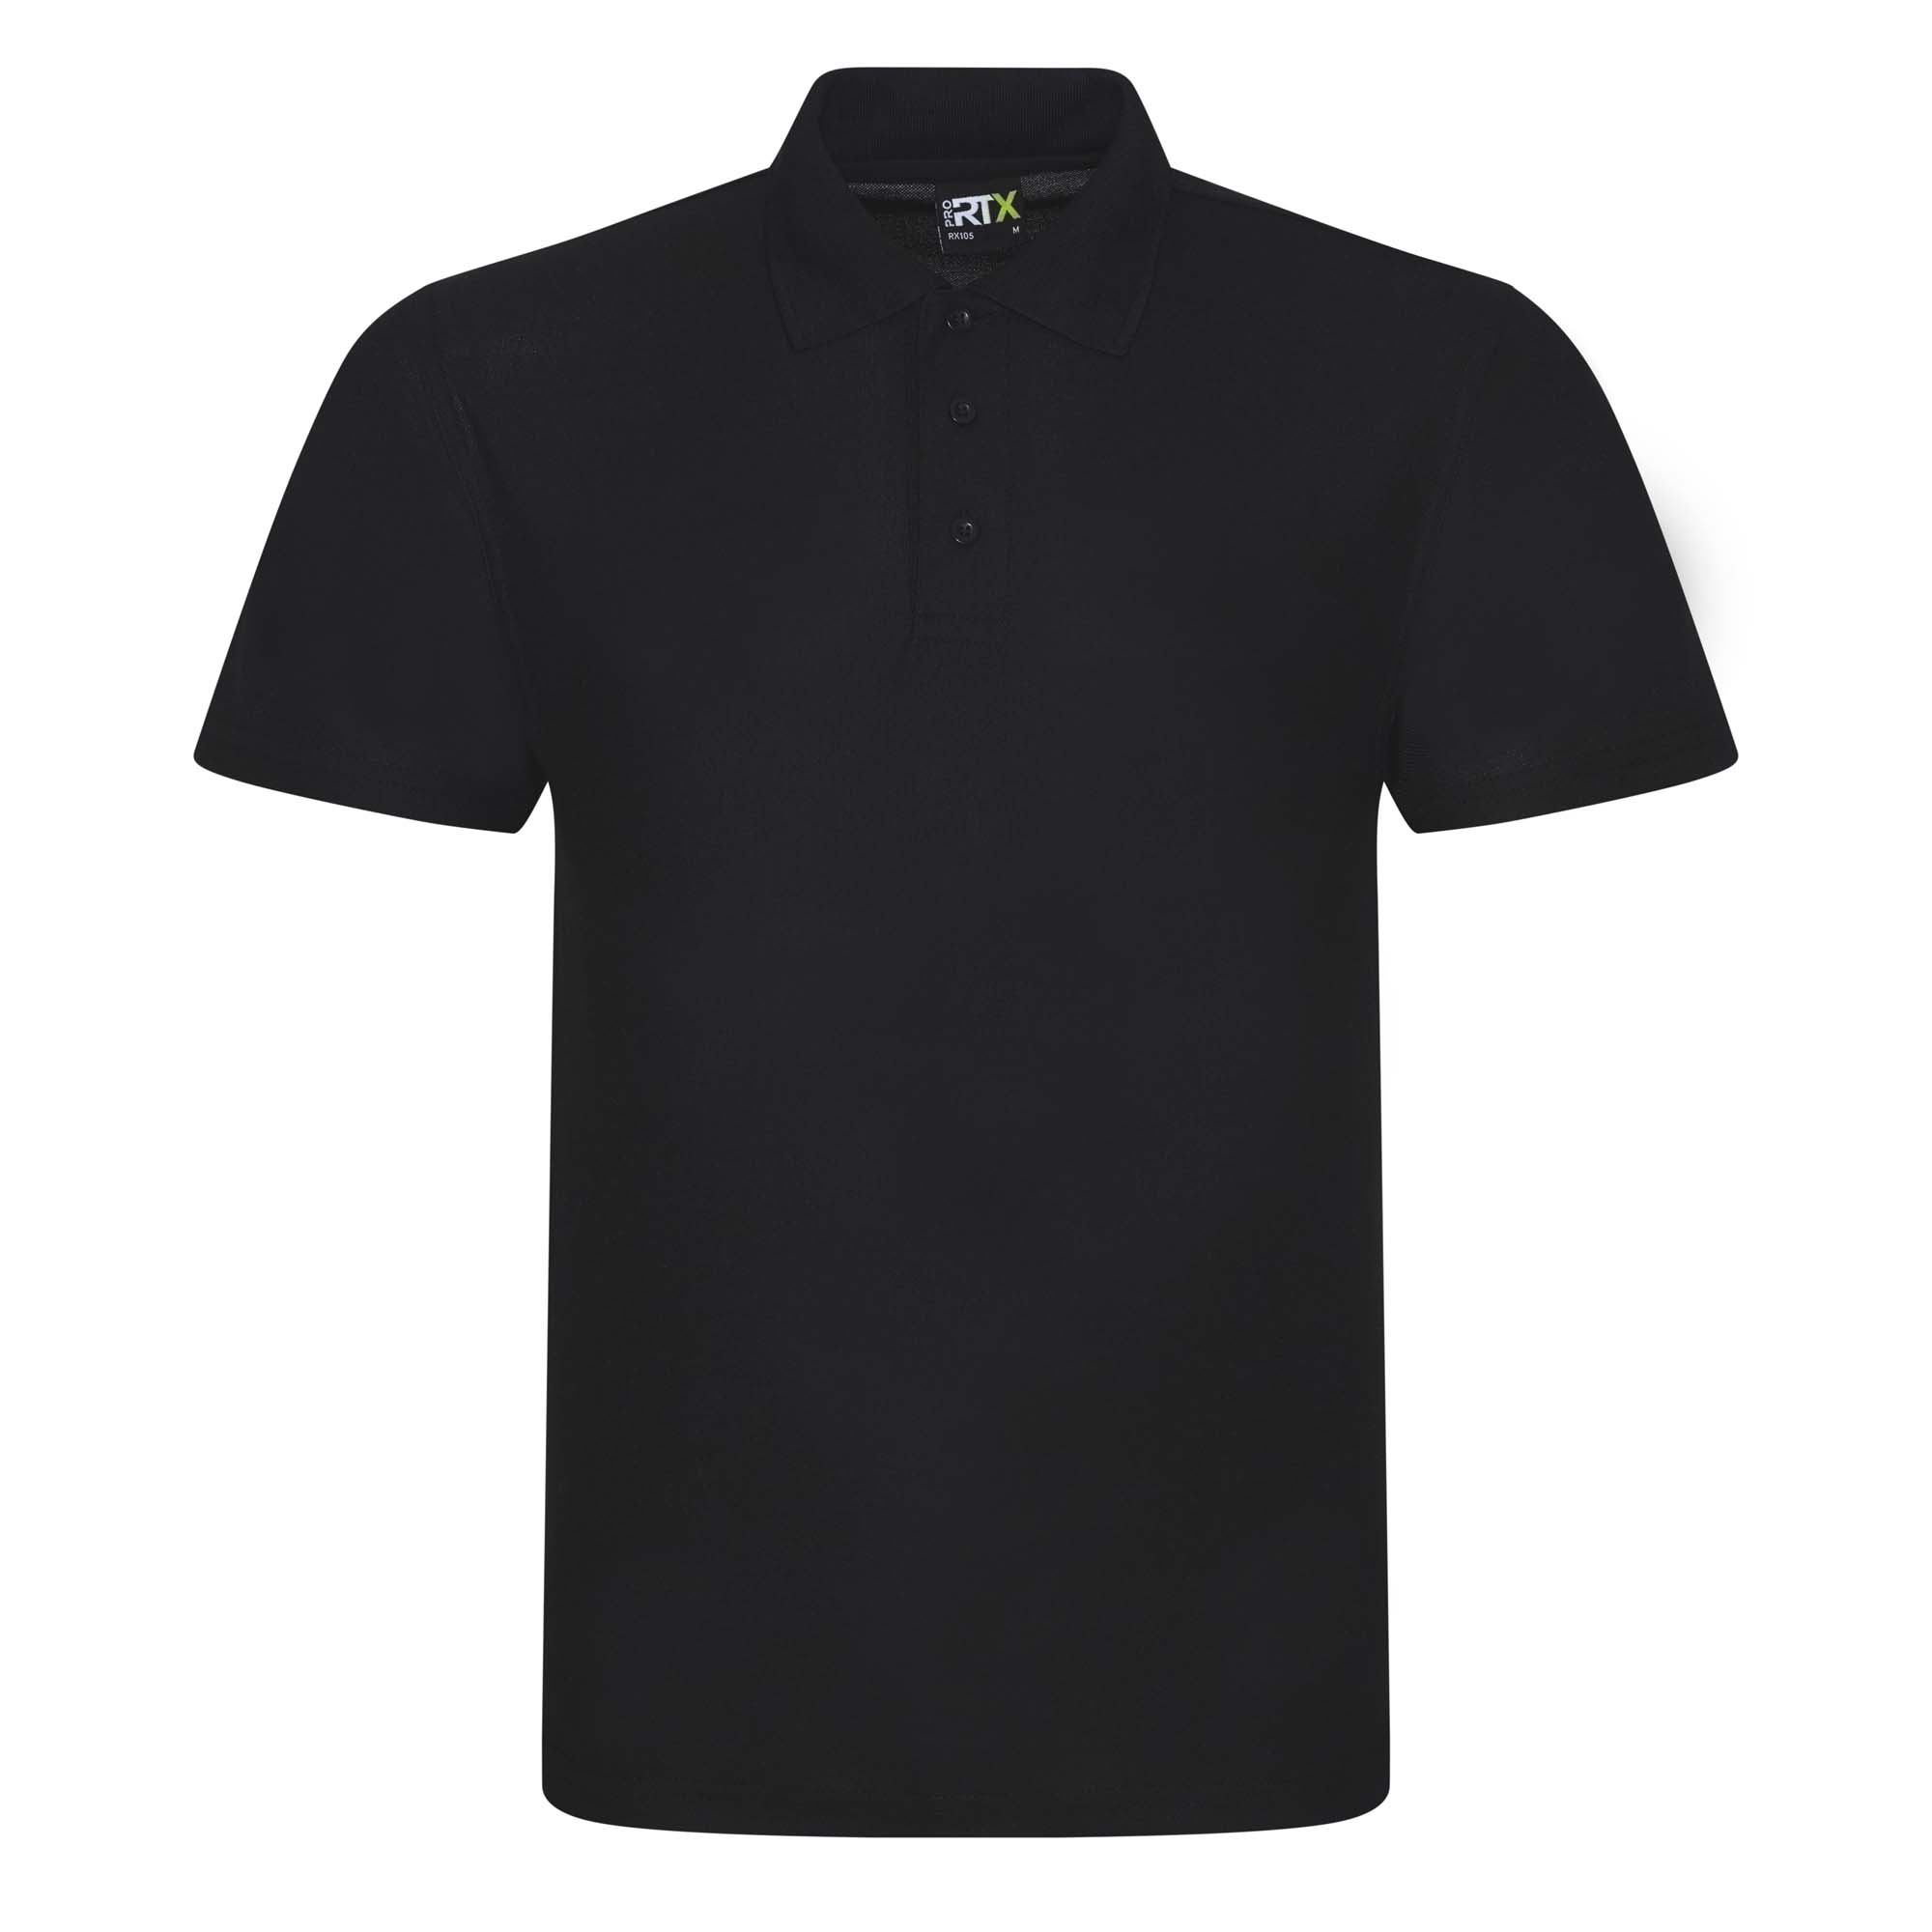 ax-httpswebsystems.s3.amazonaws.comtmp_for_downloadpro-rtx-pro-polyester-polo-black.jpg